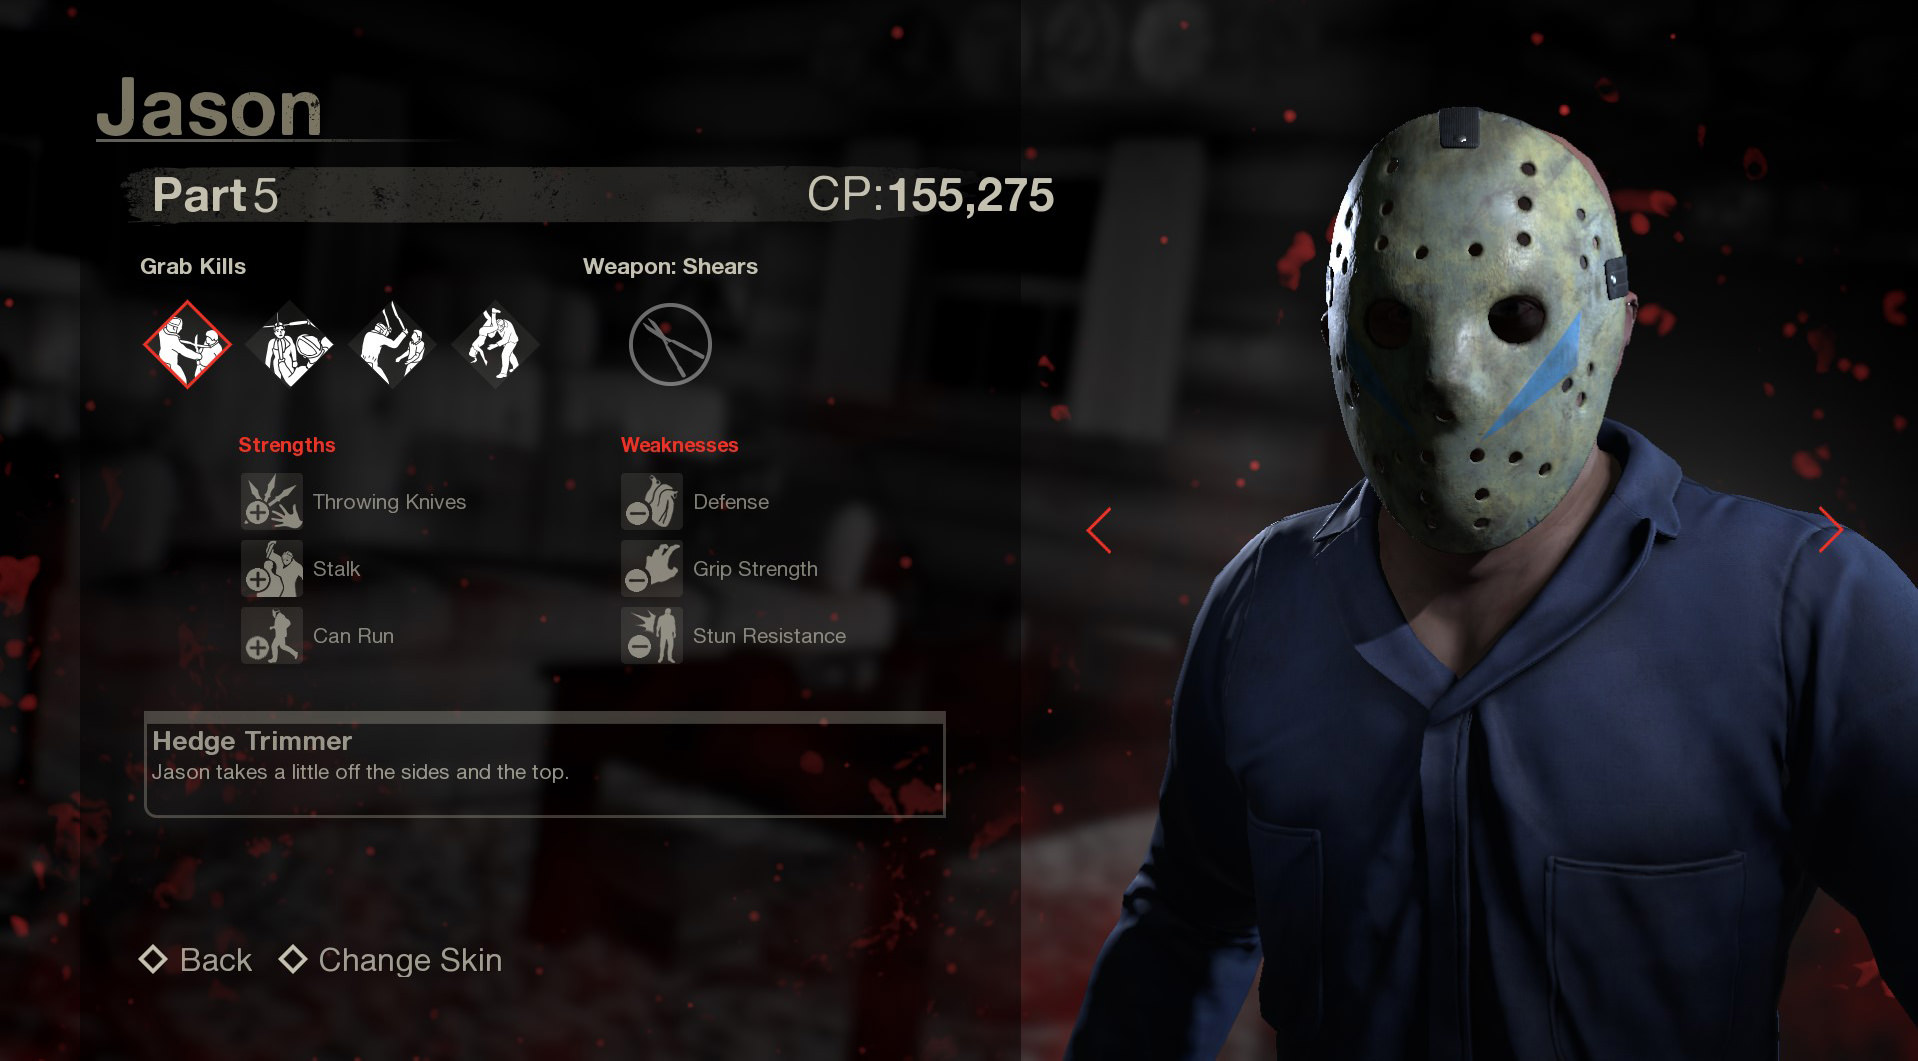 Trailer] 'A New Beginning' Map and Roy Coming to 'Friday the 13th: The Game'!  - Bloody Disgusting